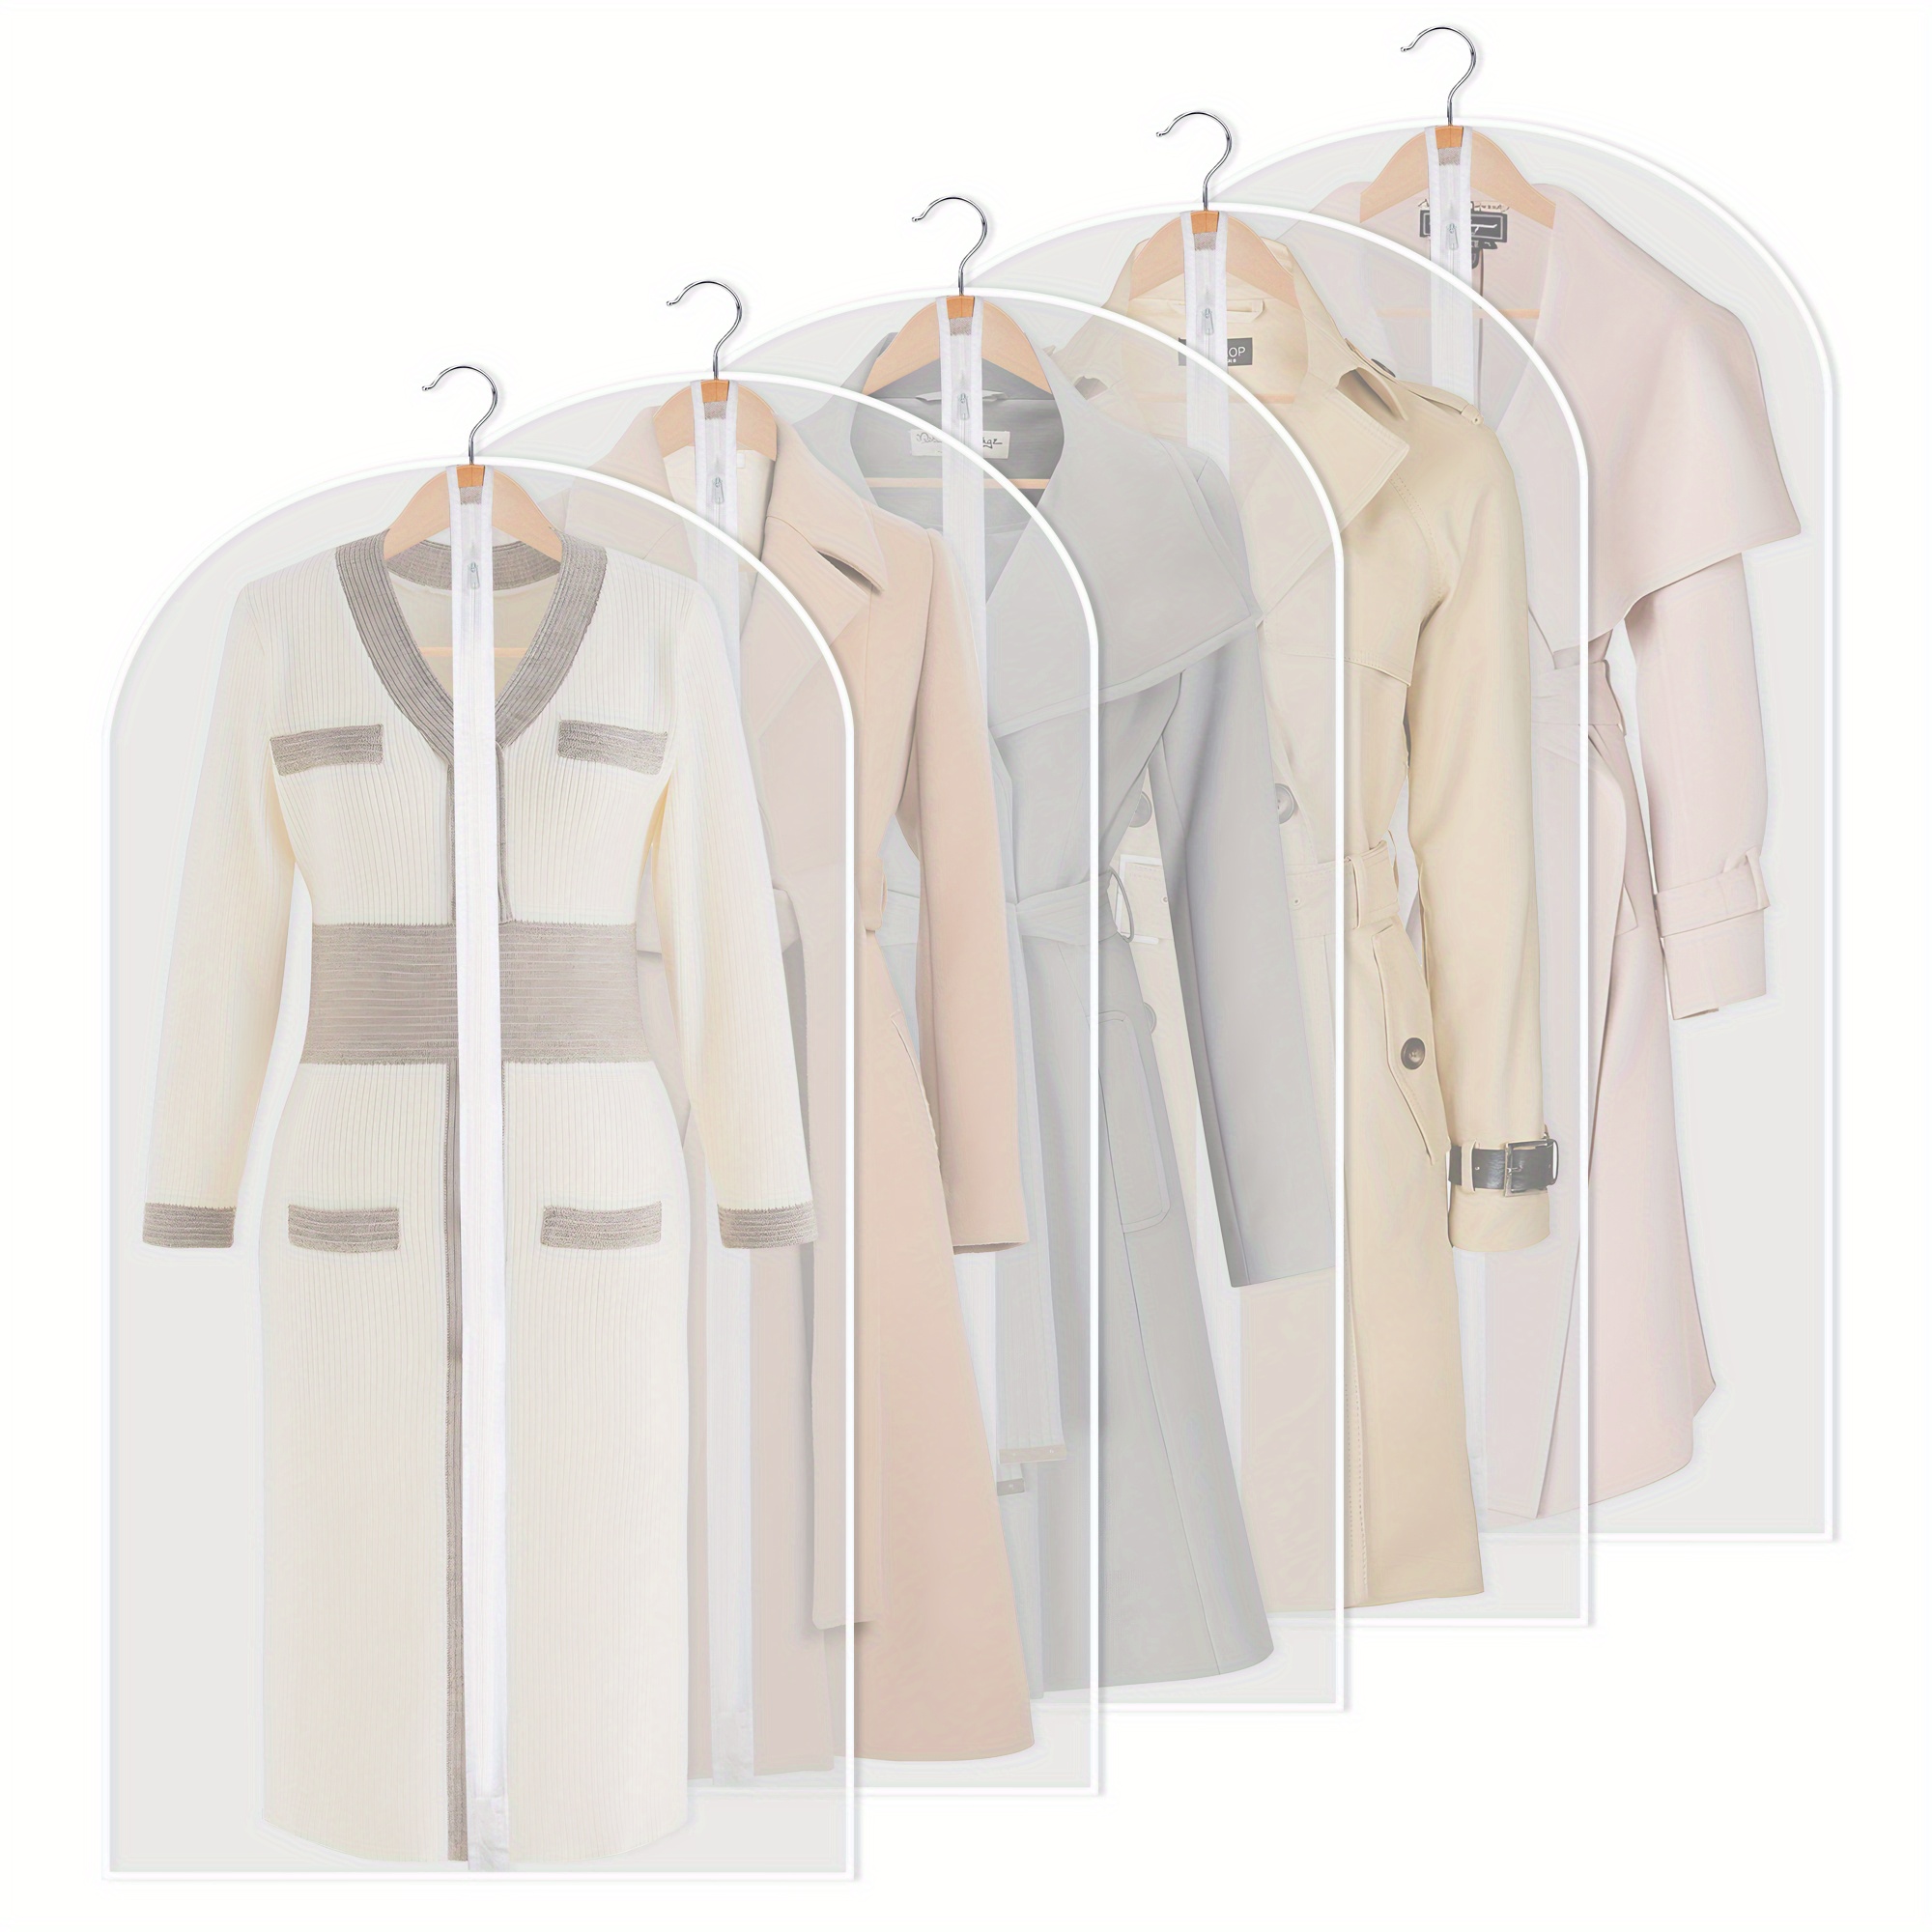 3 5pcs White Garment Bags For Hanging Clothes Clear Moth Proof